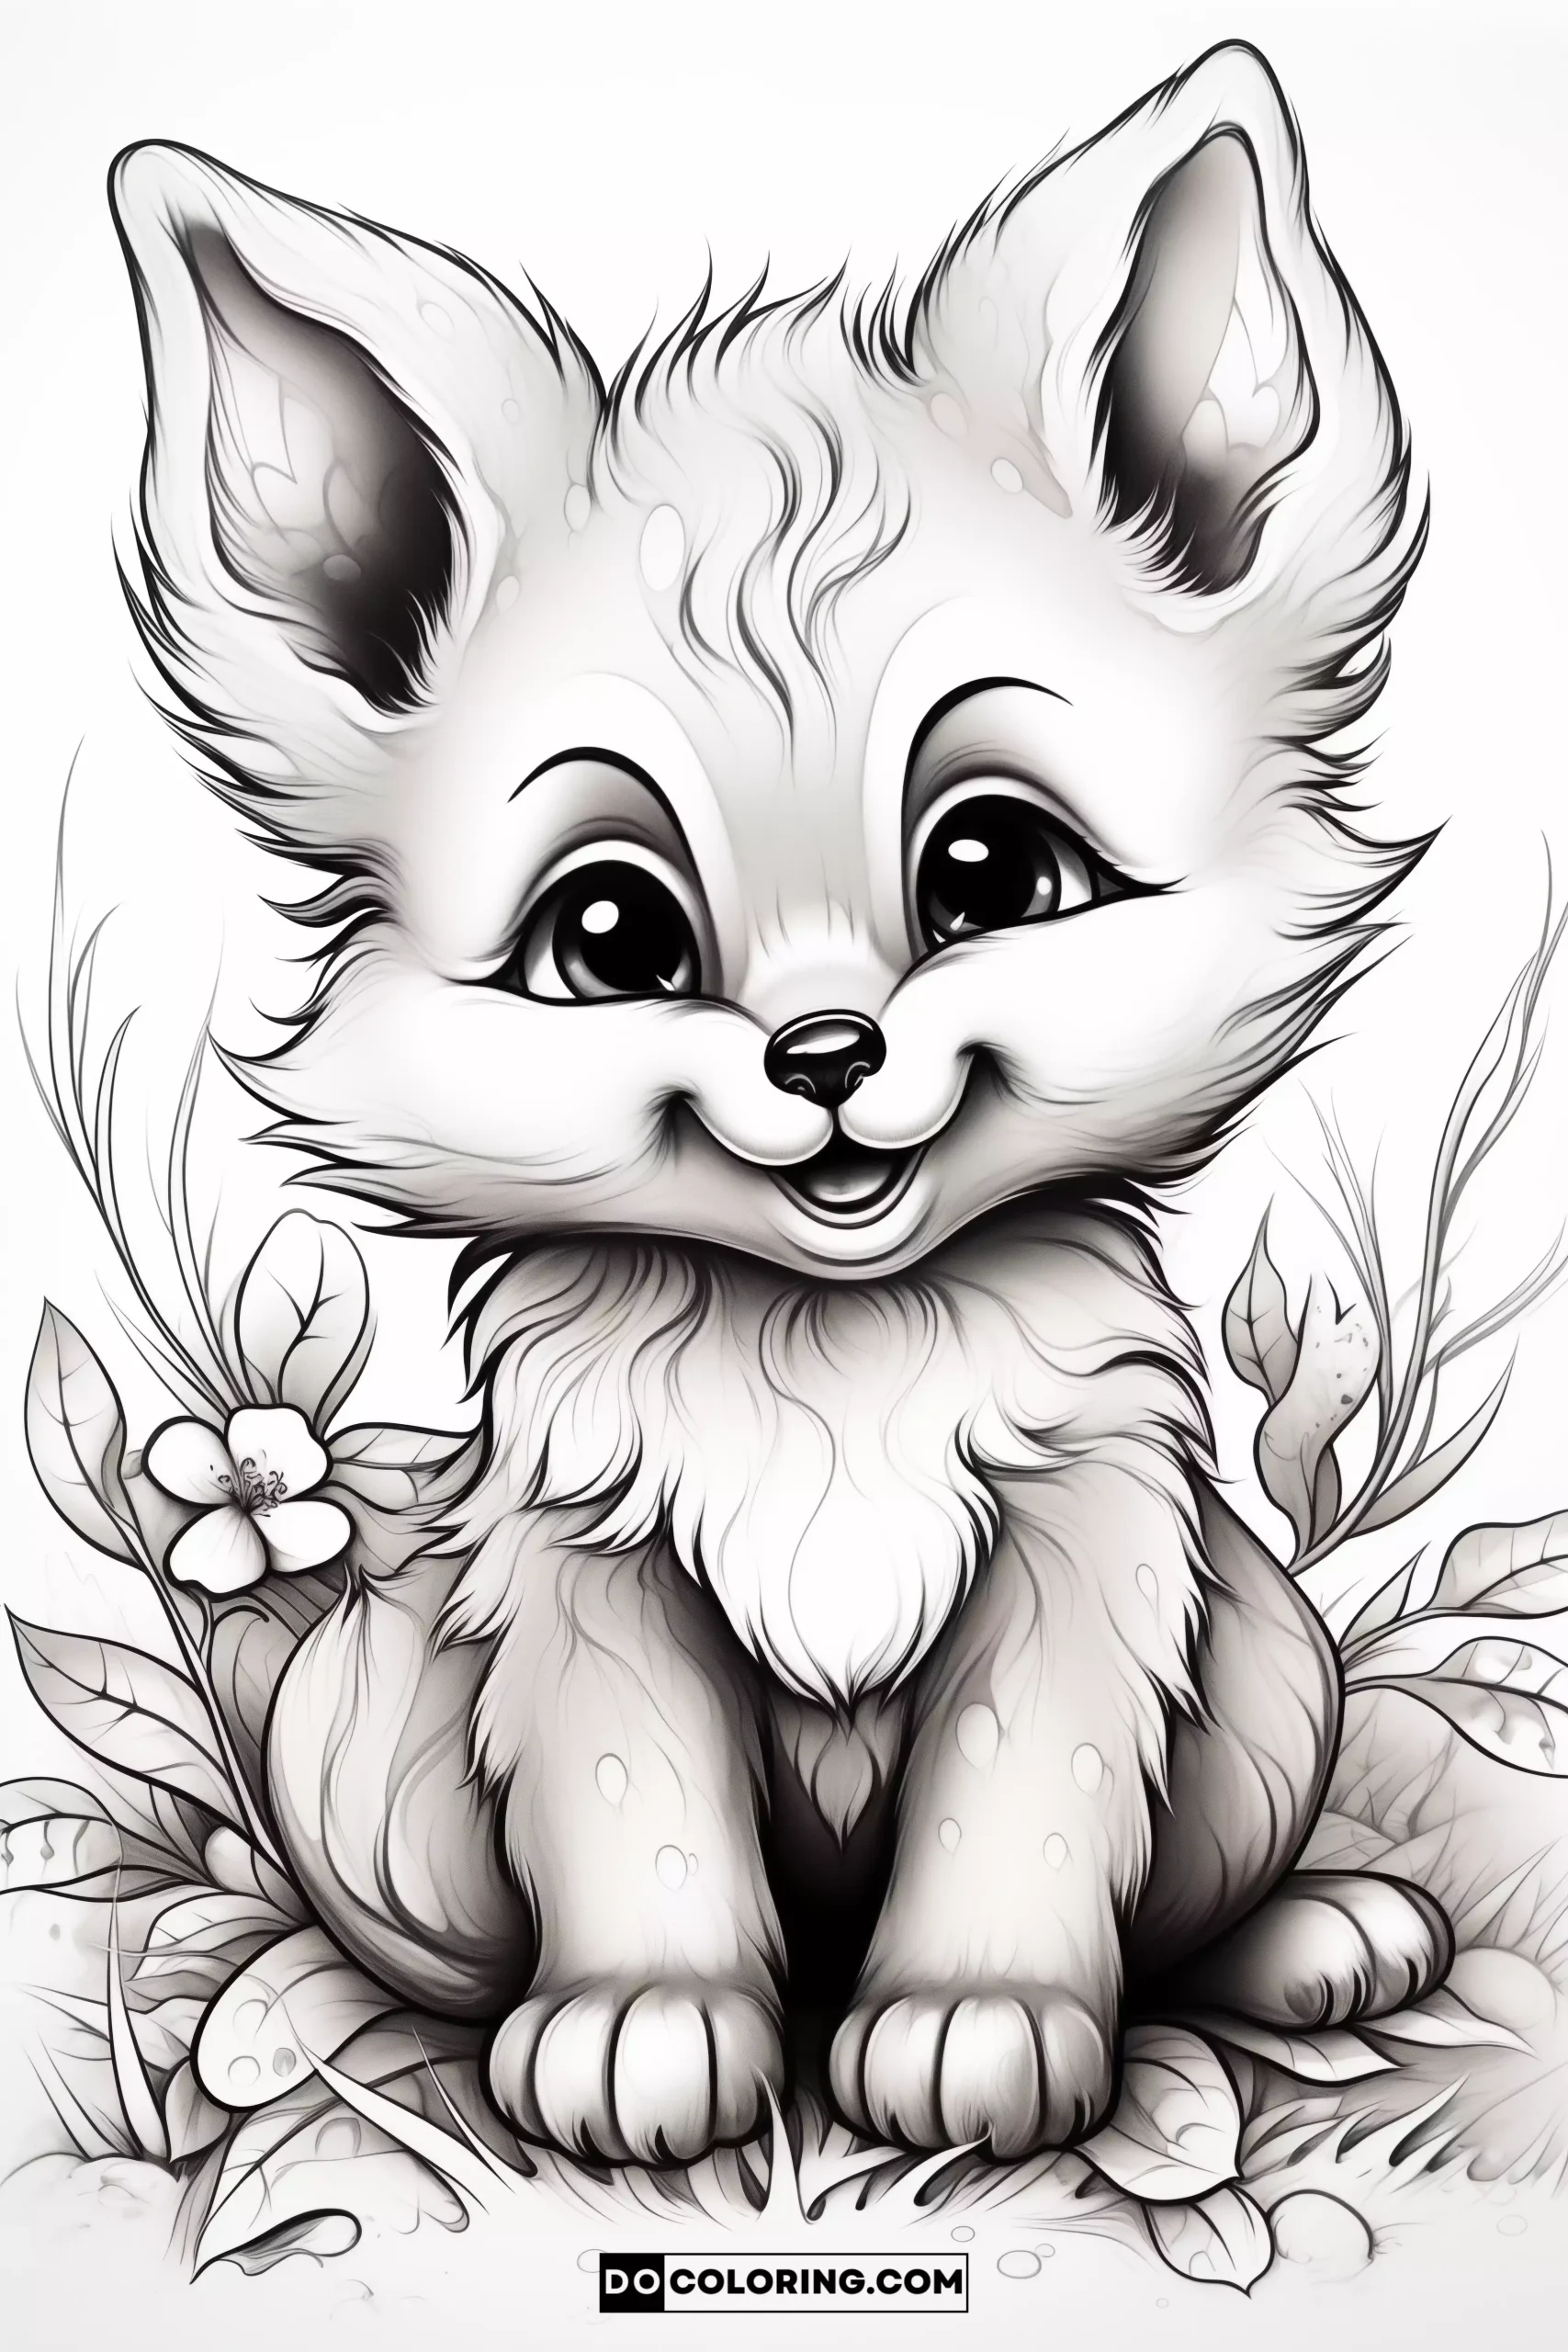 A high-quality image of a realistic cartoon baby fox coloring page carefully designed for adults.